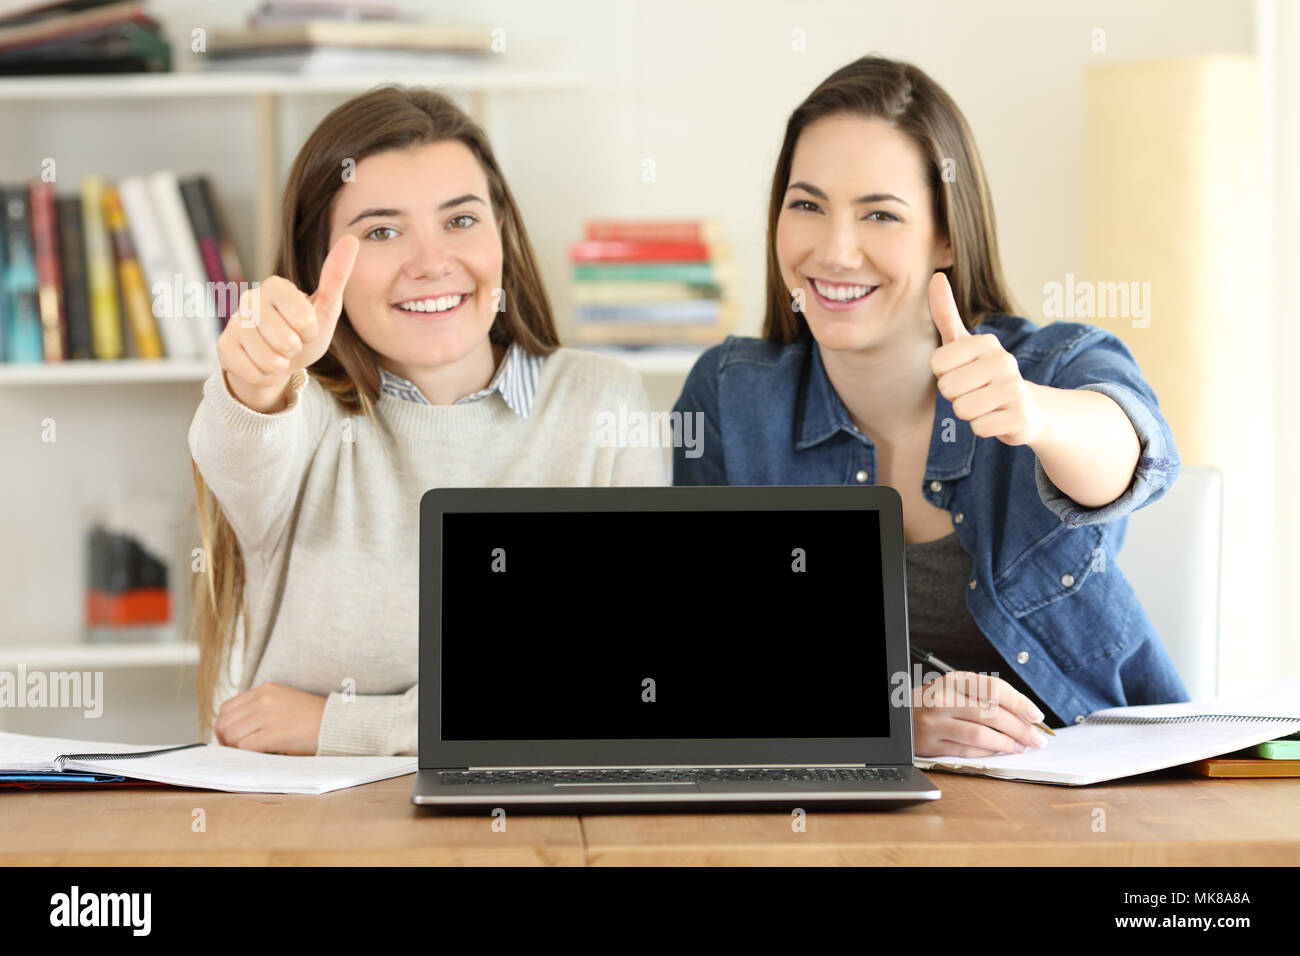 Front, view portrait of two happy students showing a blank laptop screen mockup on a desktop at home Stock Photo